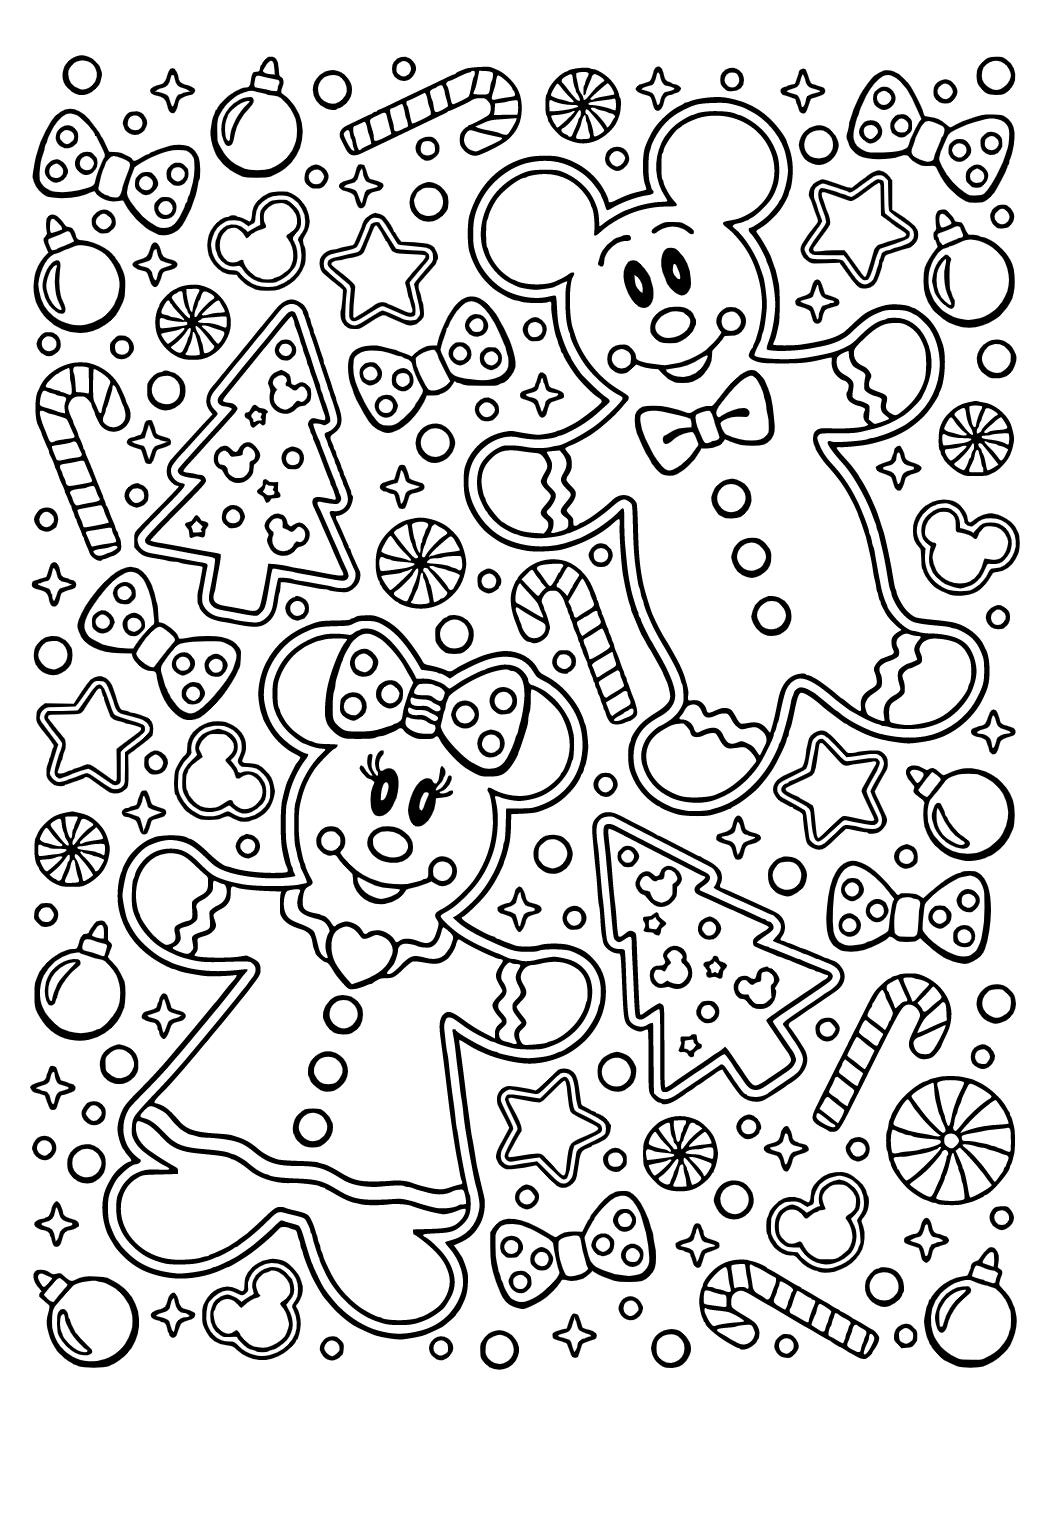 Free printable gingerbread man mouses coloring page sheet and picture for adults and kids girls and boys